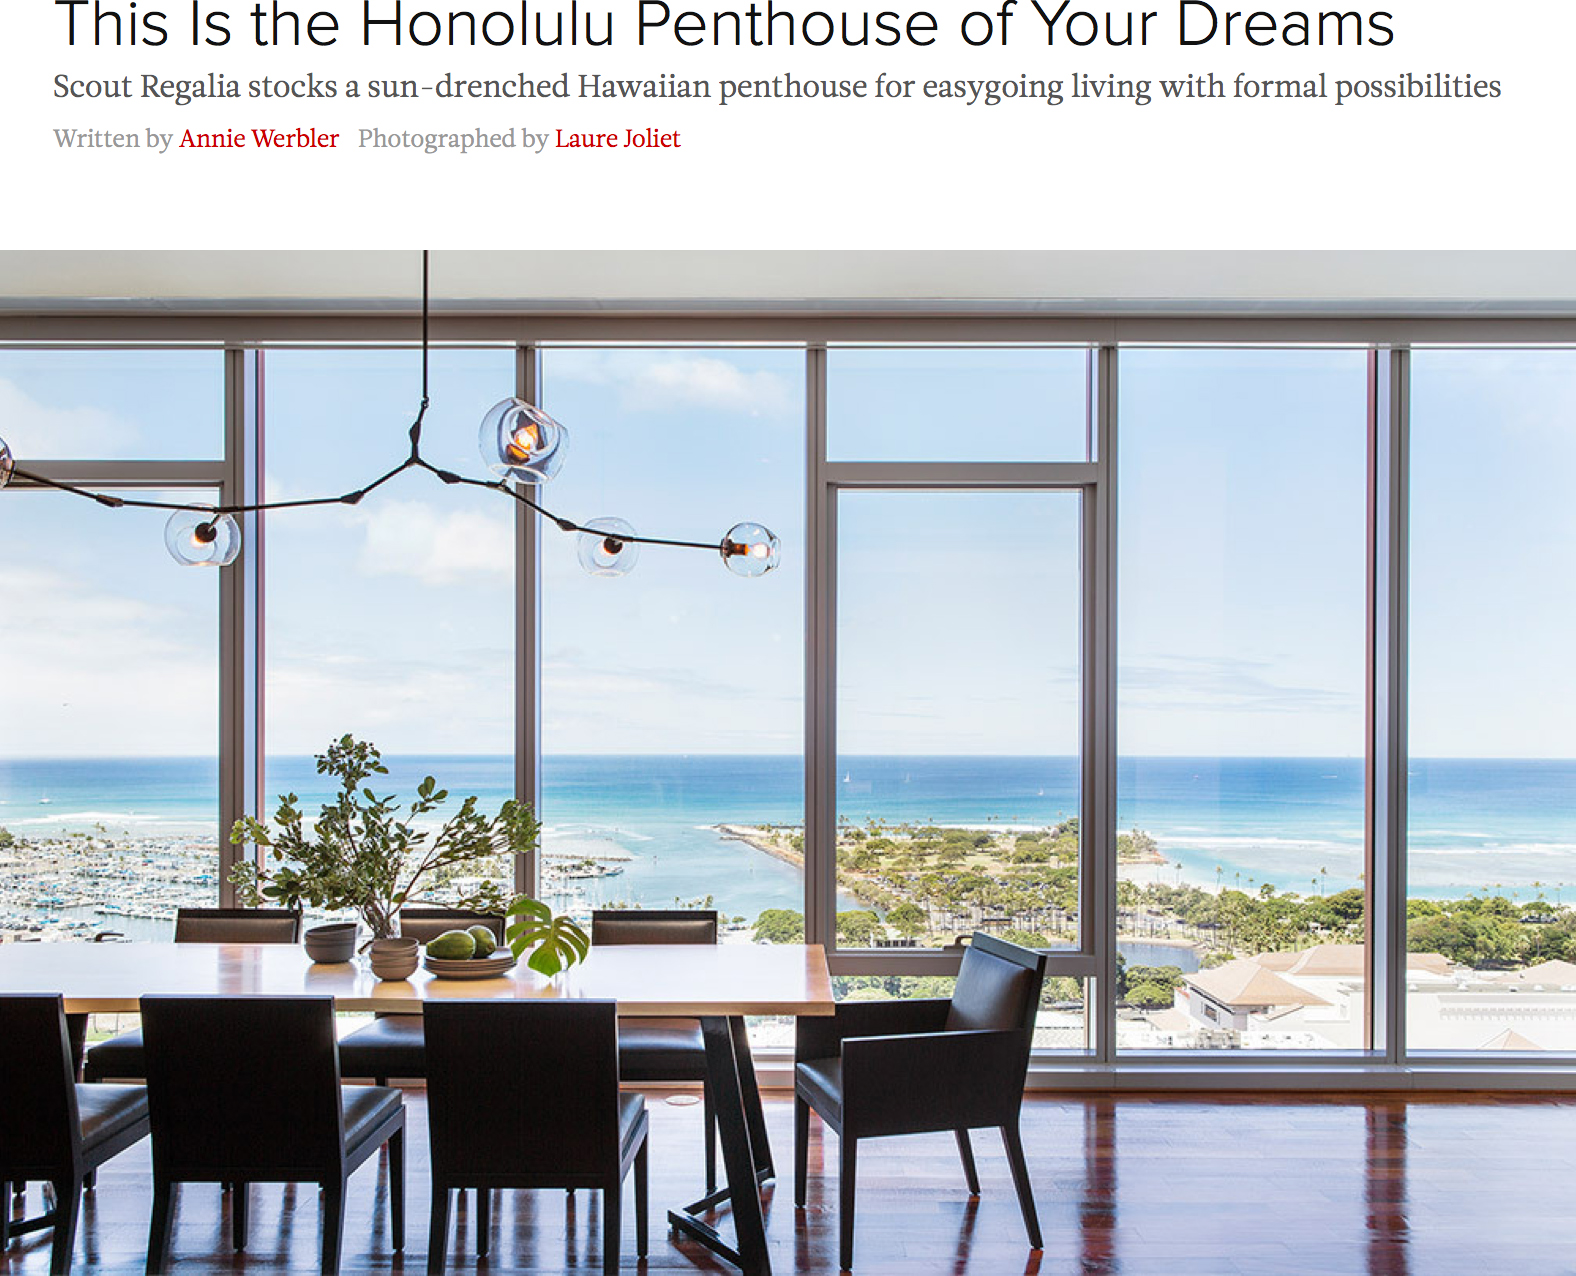   This Is the Honolulu Penthouse of Your Dreams     